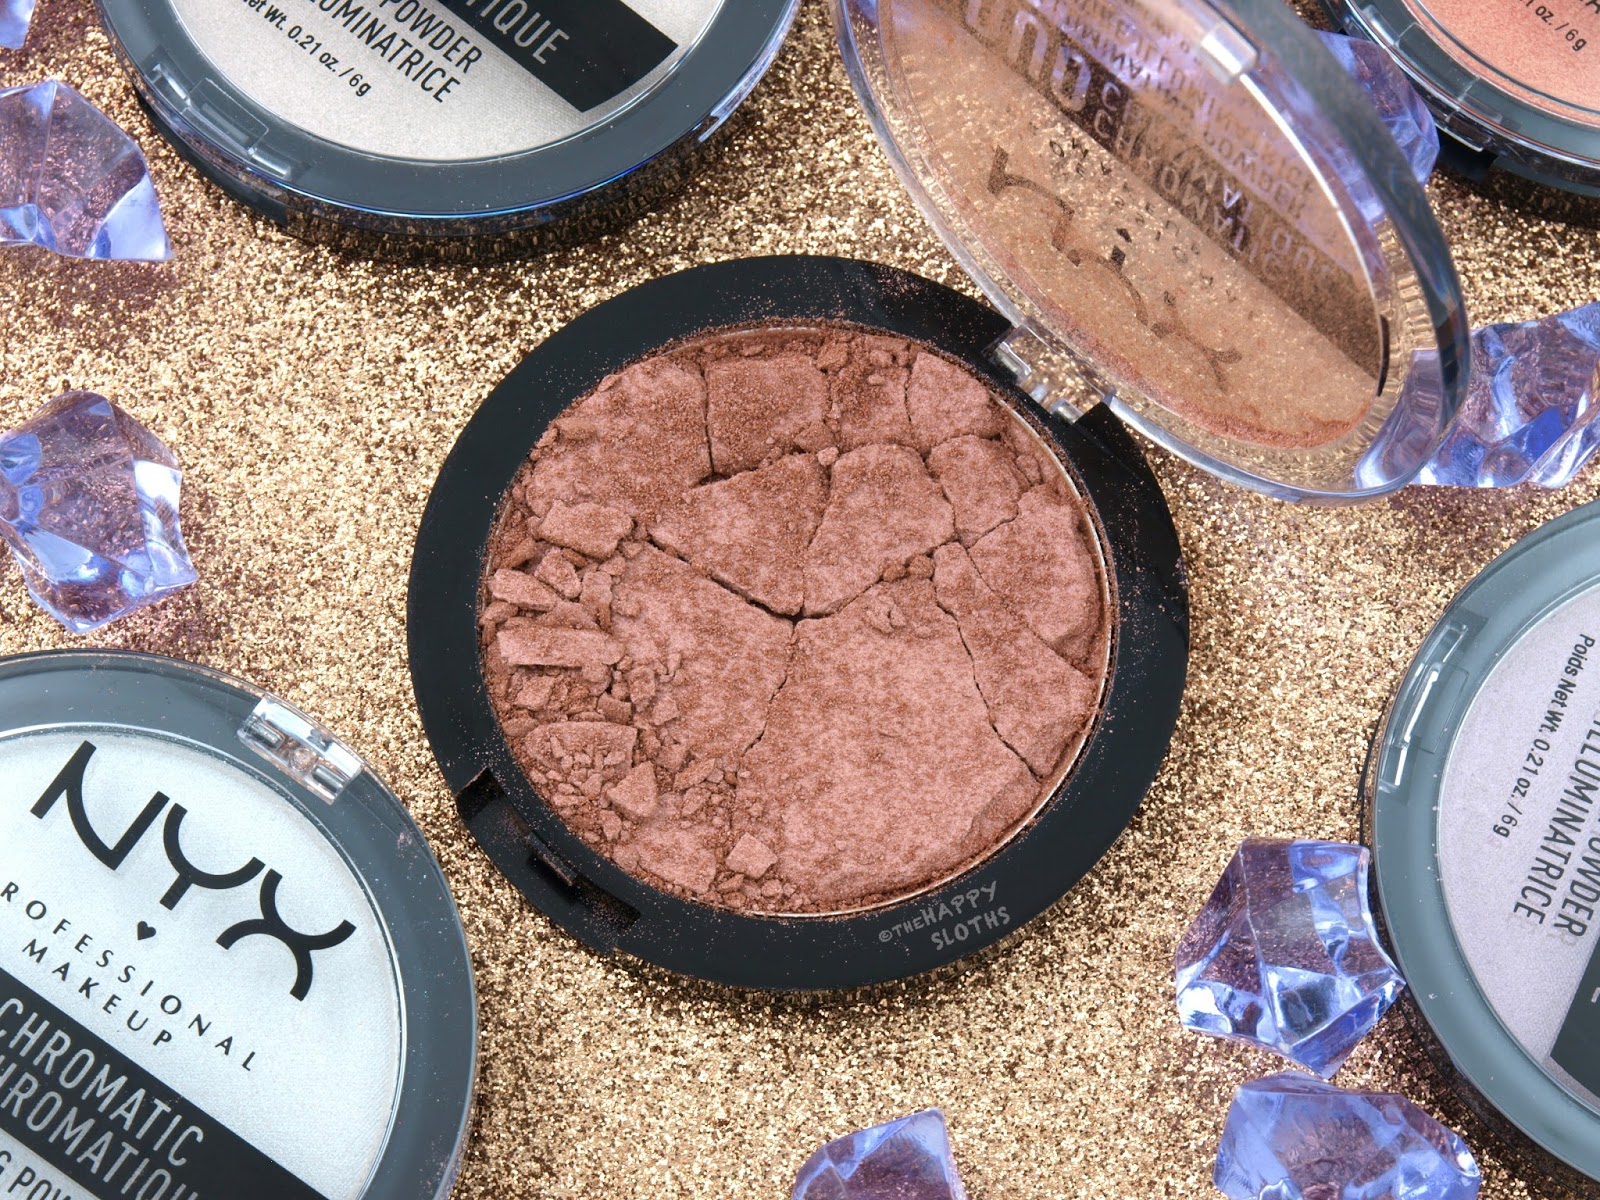 NYX Duo Chromatic Illuminating Powder in "03 Crushed Bloom": Review and Swatches